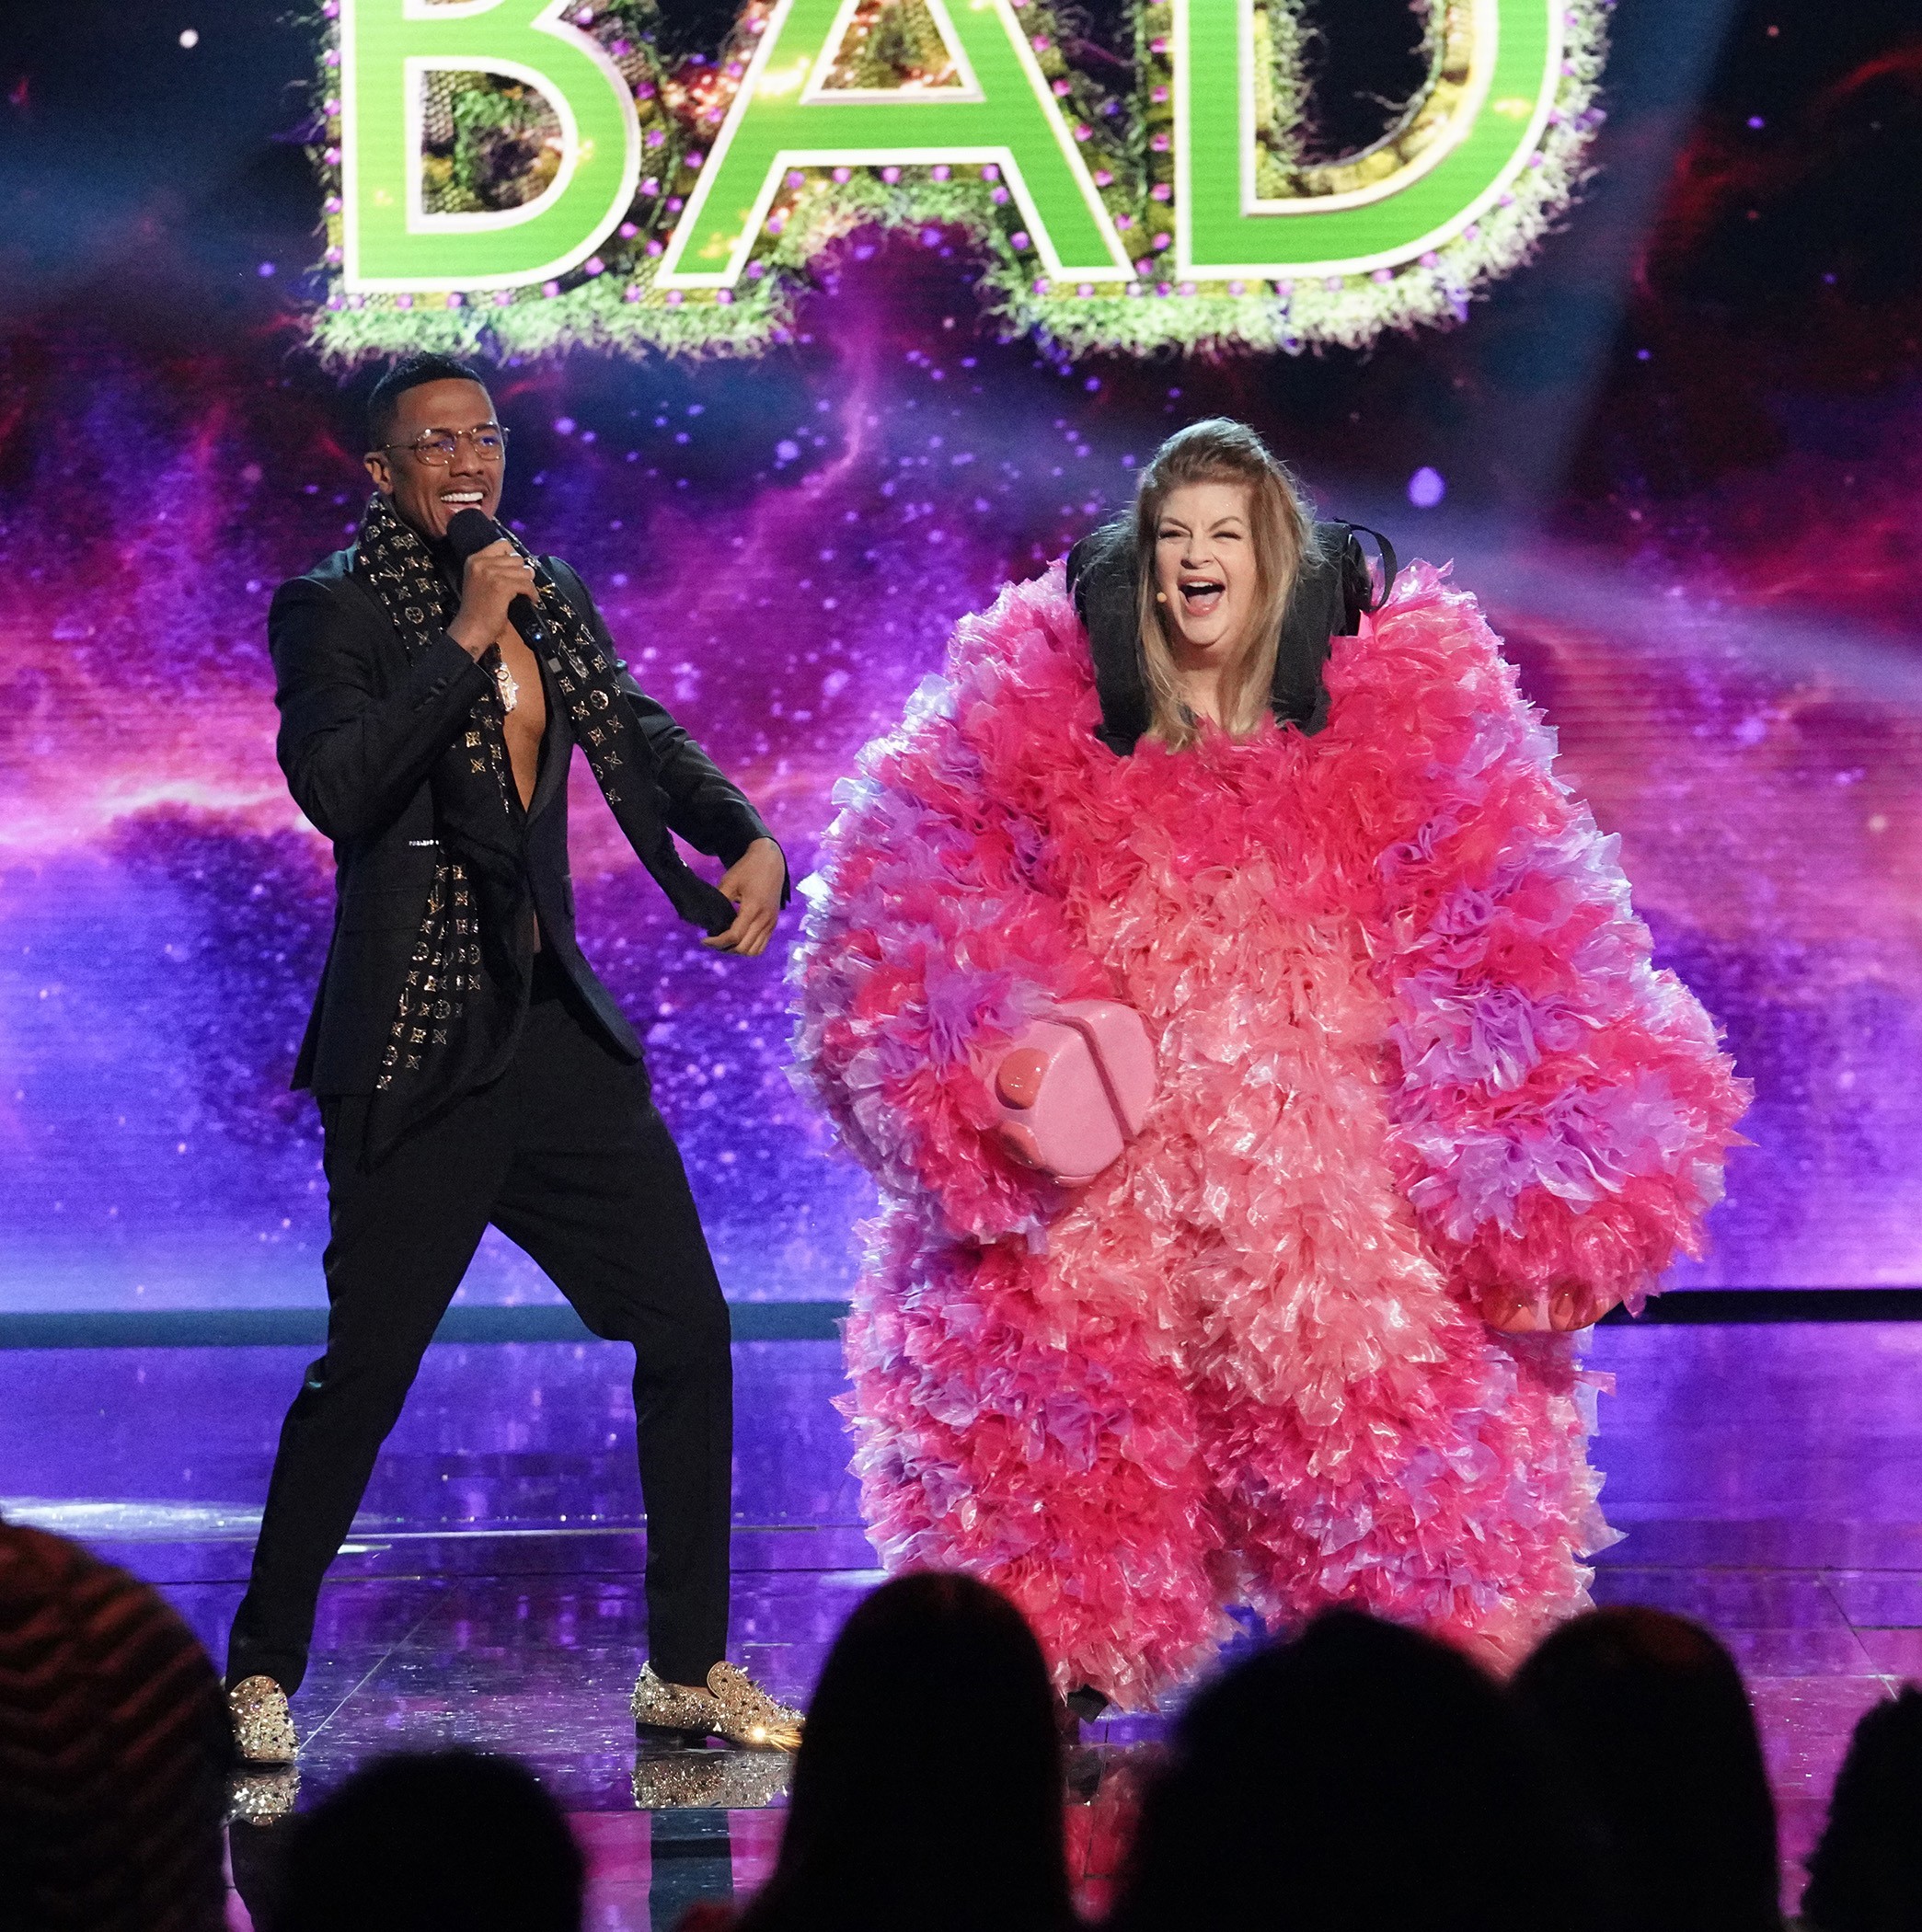 THE MASKED SINGER, from left: host Nick Cannon, Kirstie Alley (revealed as Baby Mammoth), The Mask of Least Resistence - Round 3' 